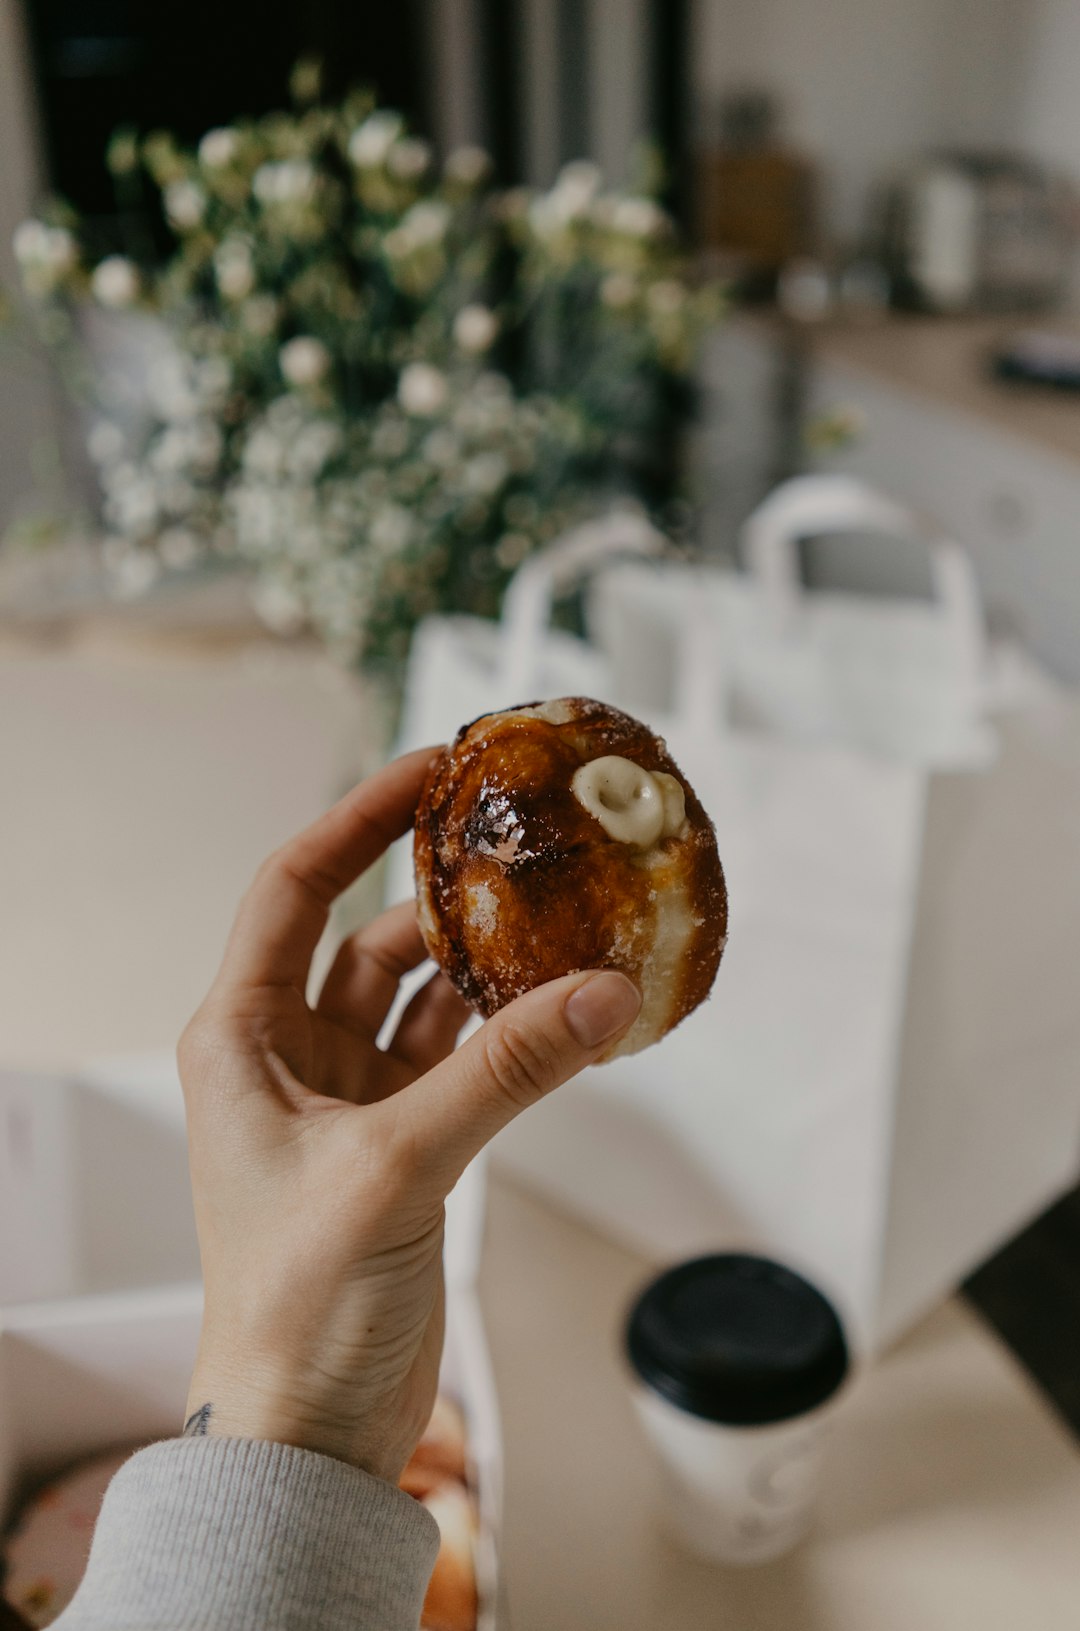 person holding doughnut with chocolate